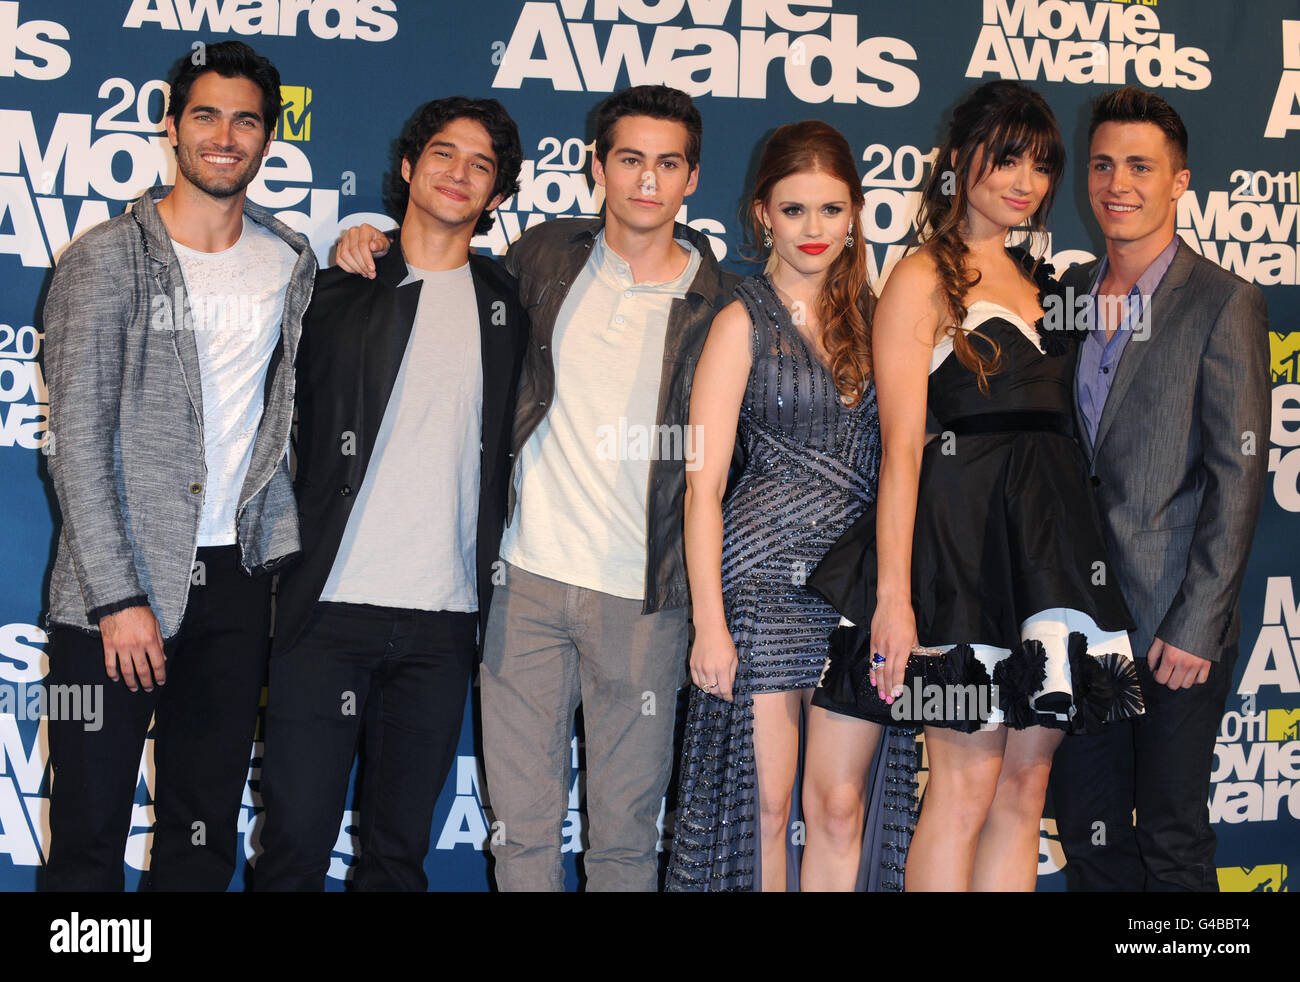 The cast of television series Teen Wolf (from left to right) Tyler Hoechlin, Tyler Posey, Dylan O'Brien, Holland Roden, Crystal Reed and Colton Haynes at the MTV Movie Awards 2011 at the Gibson Amphitheatre in Universal City, Los Angeles. Stock Photo